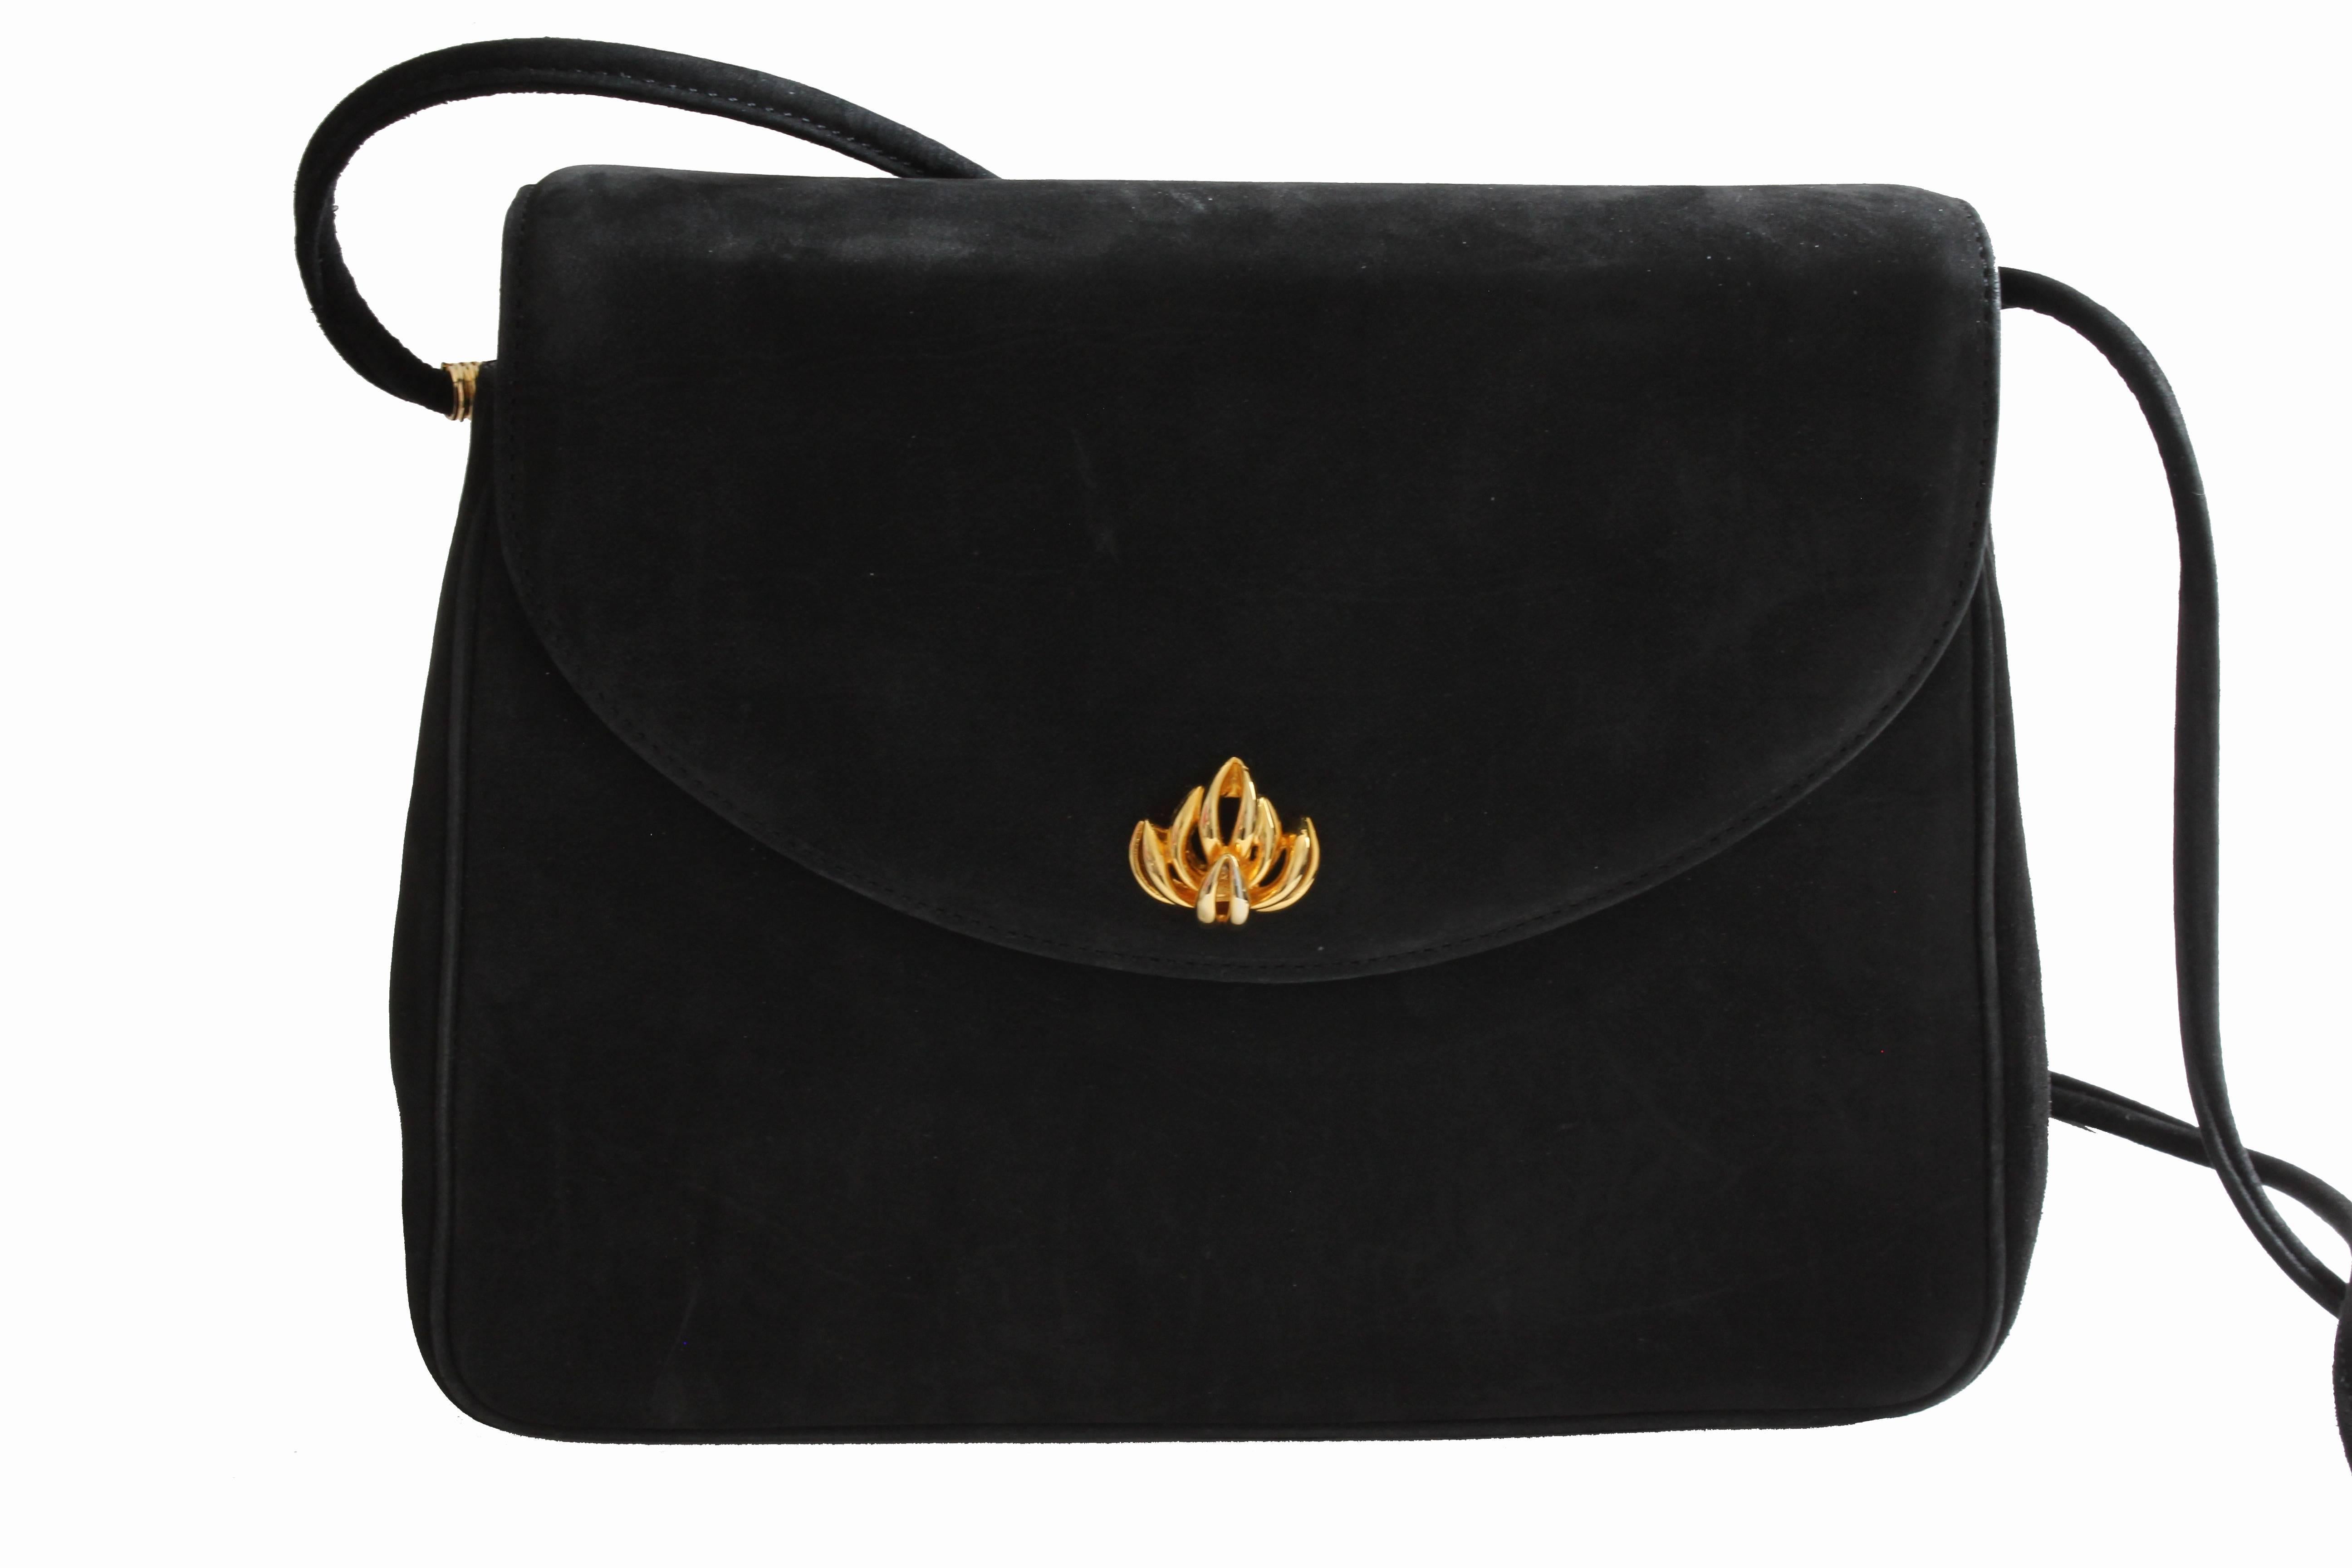 This classic handbag was made by Asprey London, most likely in the mid 1970s.  Made from black suede leather, it features a top flap, a hidden magnetic fastener and a removable shoulder strap for wear as a clutch or as a shoulder bag.  Lined in